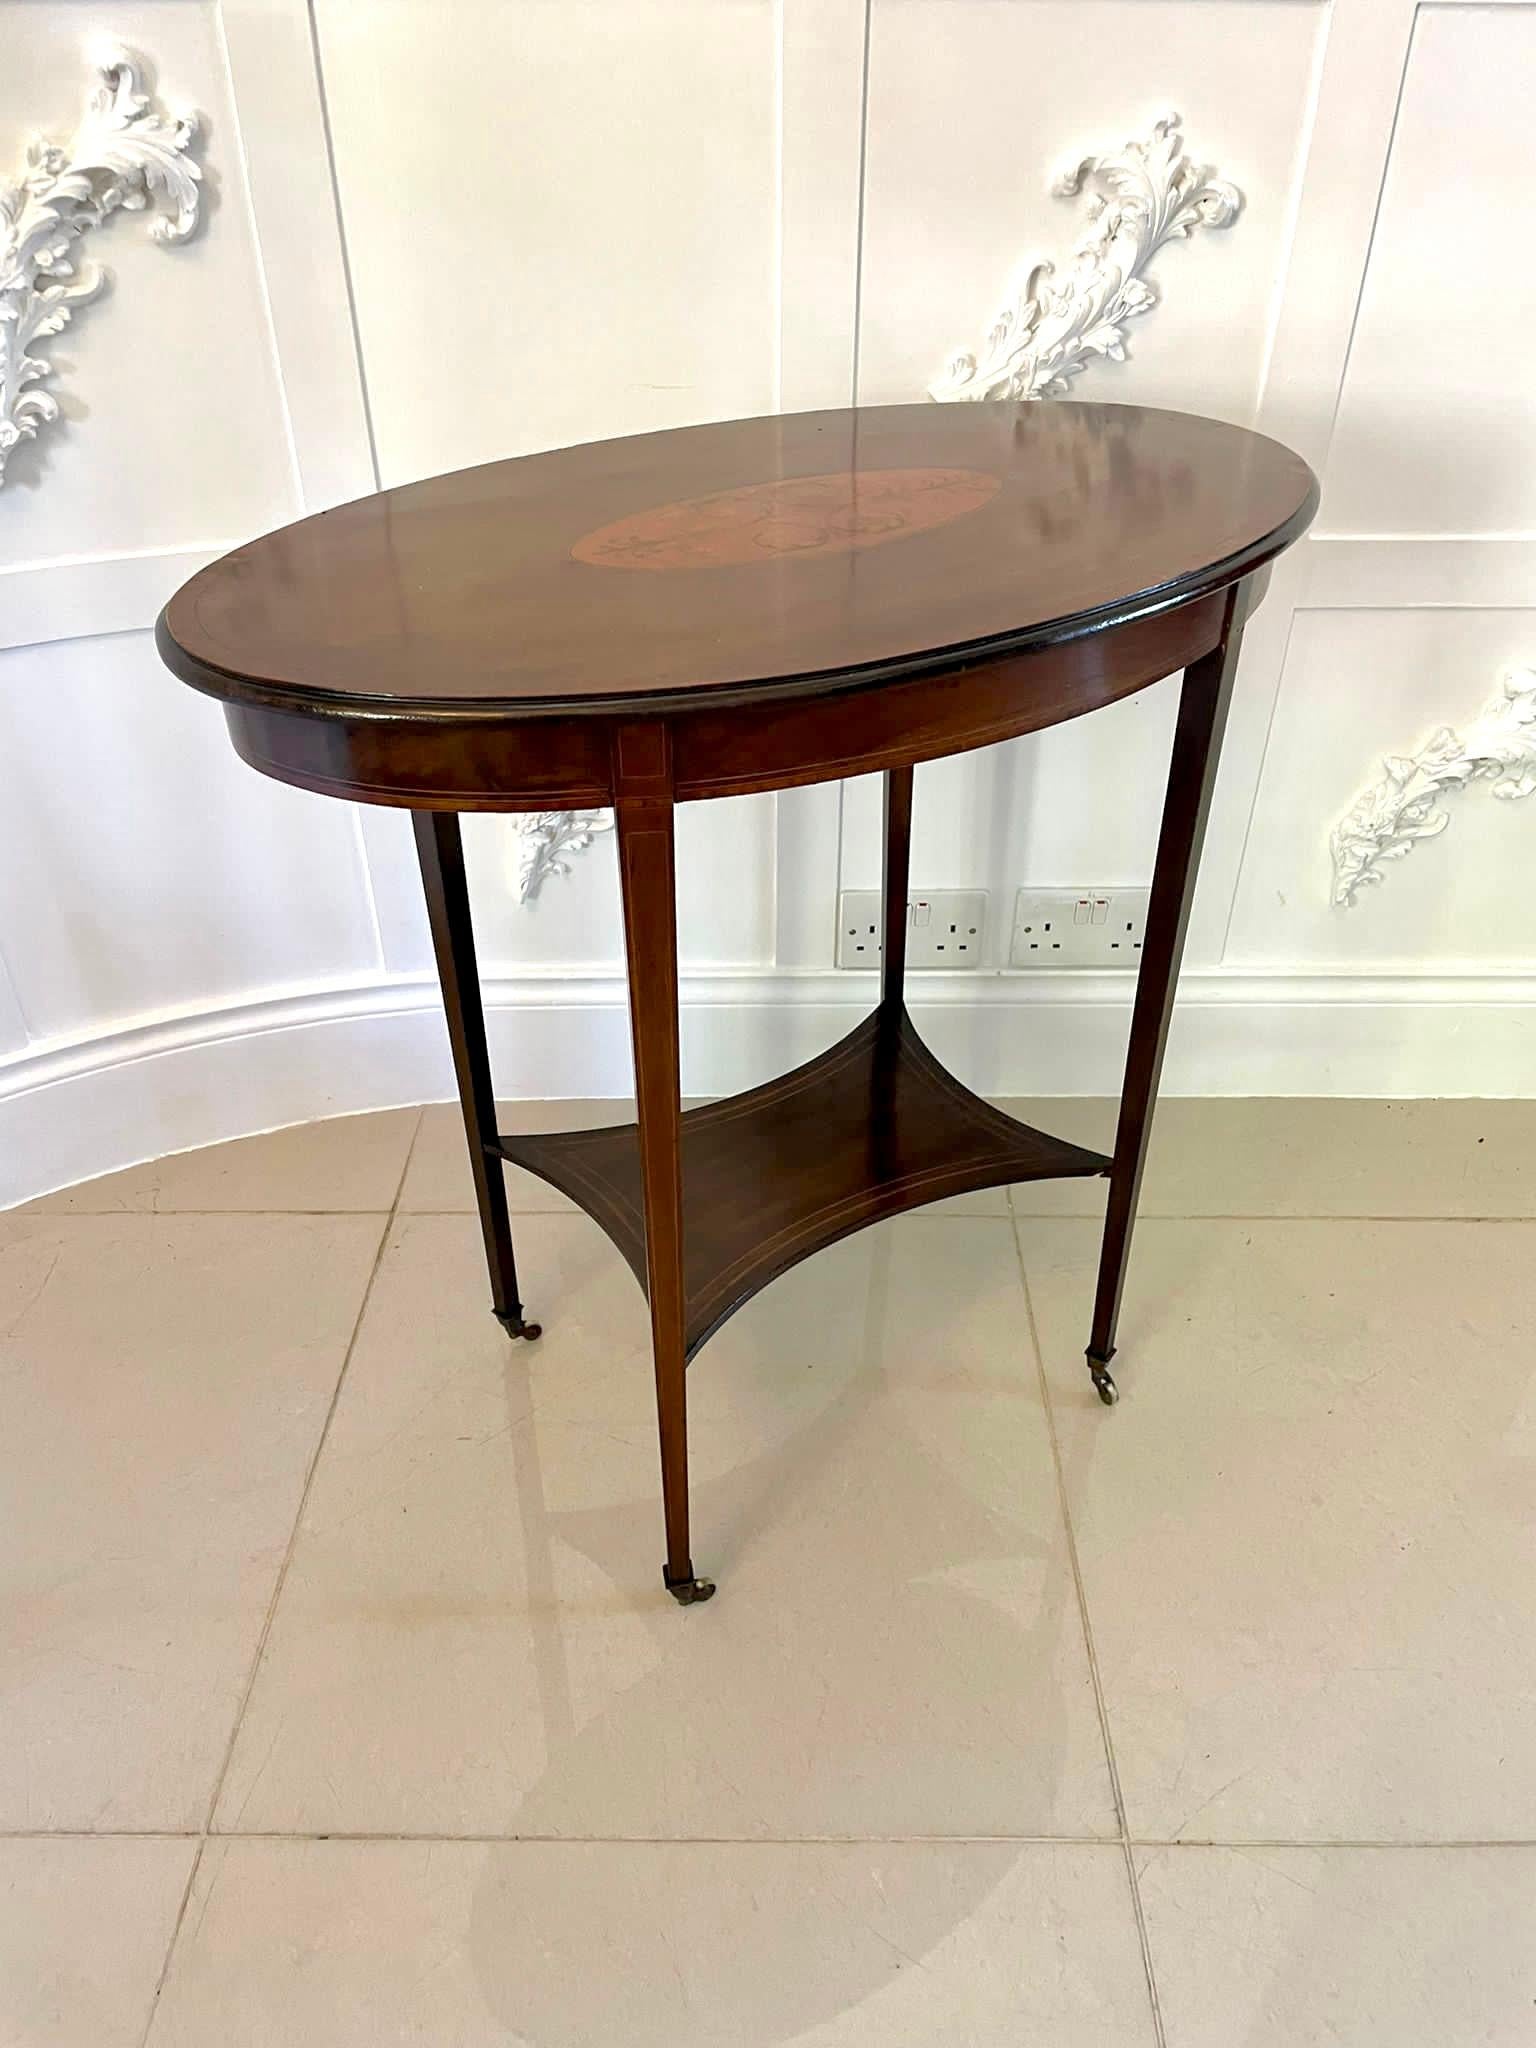 Early 20th Century Antique Edwardian Oval Quality Mahogany Inlaid Lamp Table For Sale